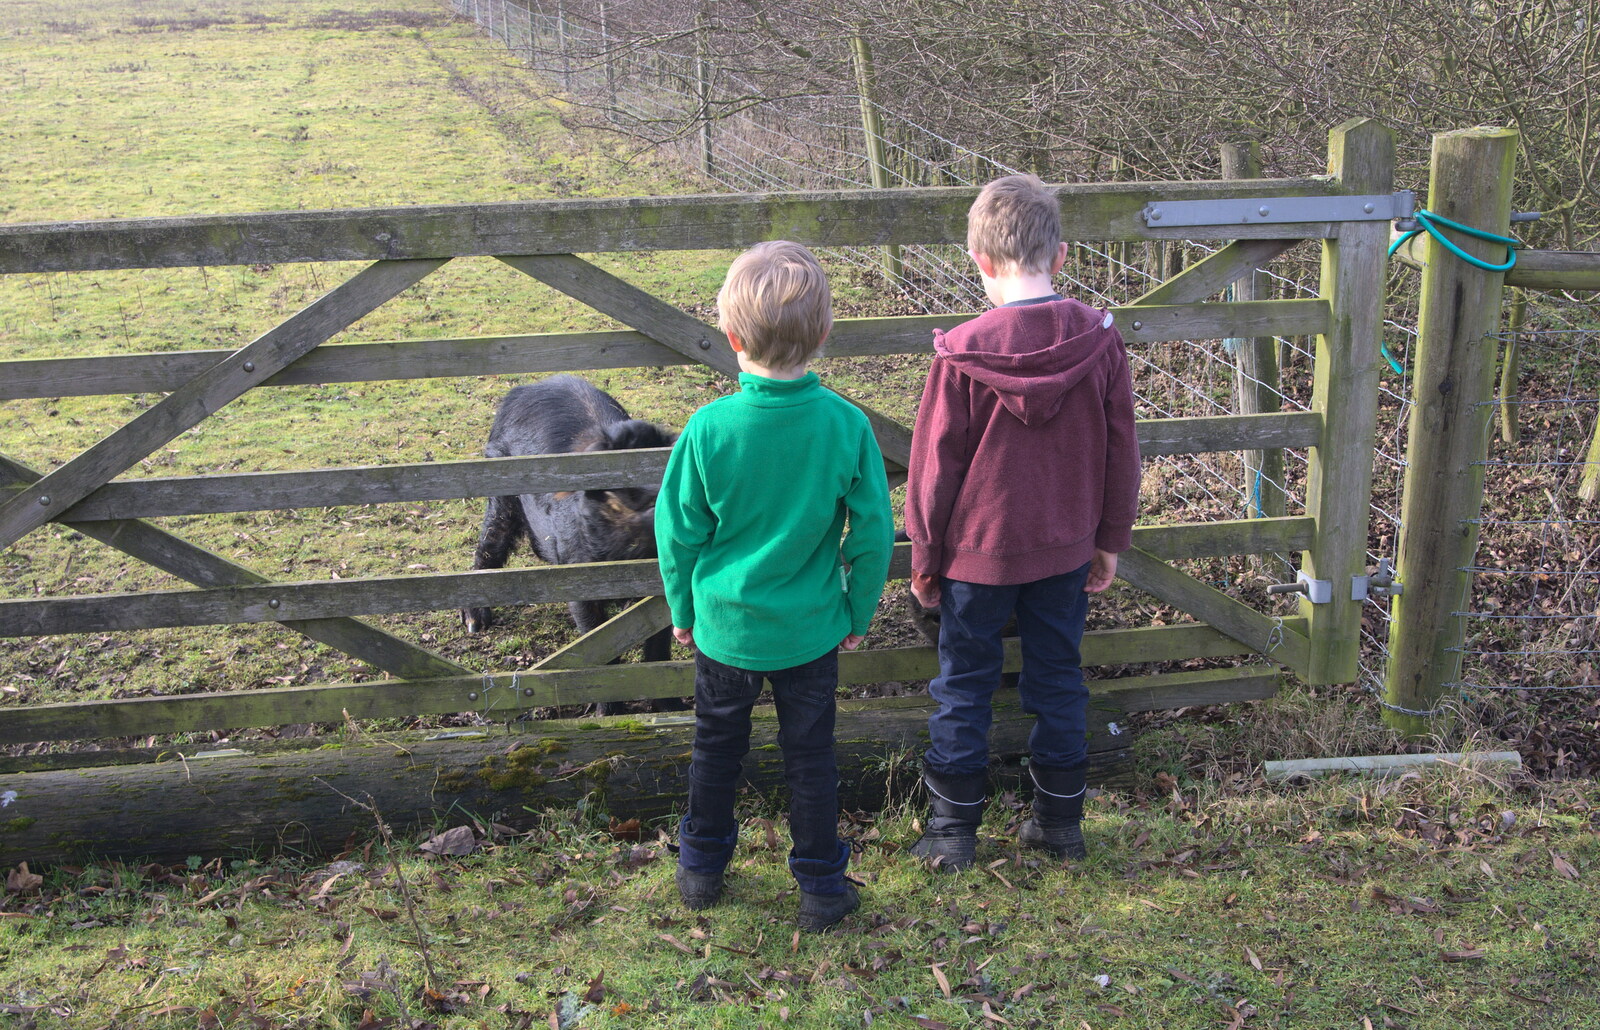 The boys say 'hi' to the hairy pigs from A Winter's Walk, Thrandeston, Suffolk - 5th February 2017